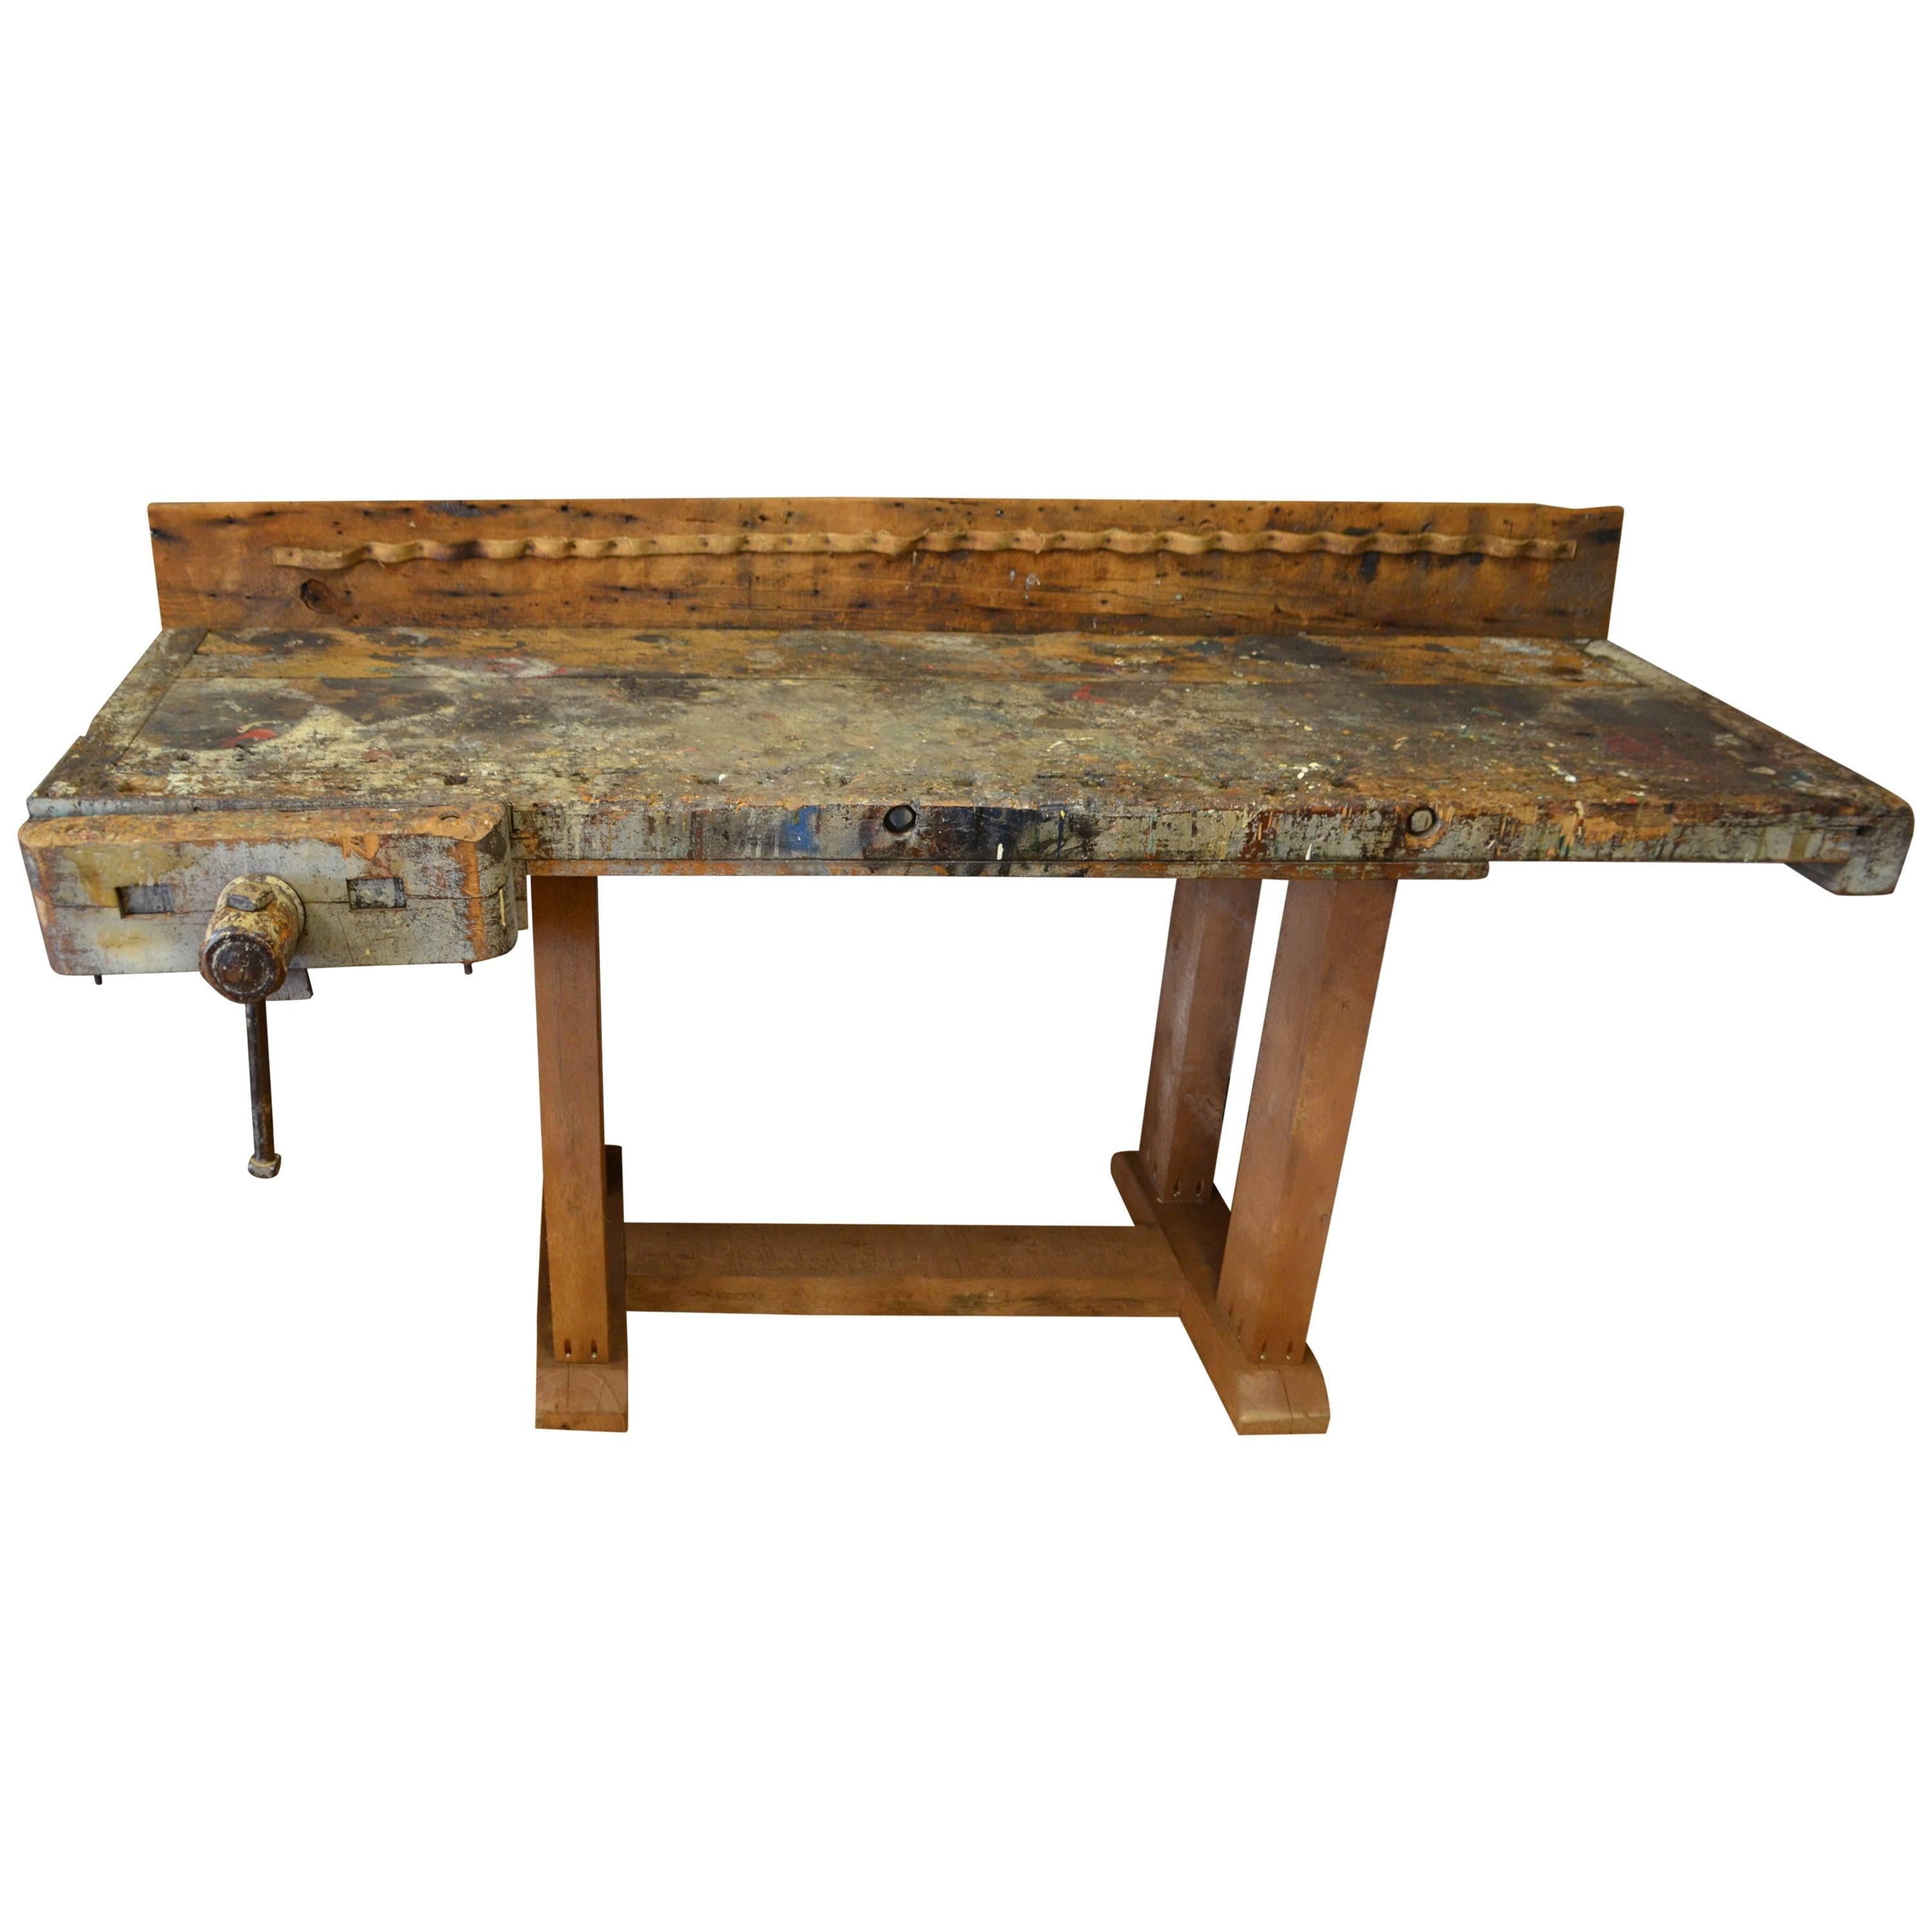 Butcher Block Woodworker's Table on Reclaimed Wooden Base, Late 1800s